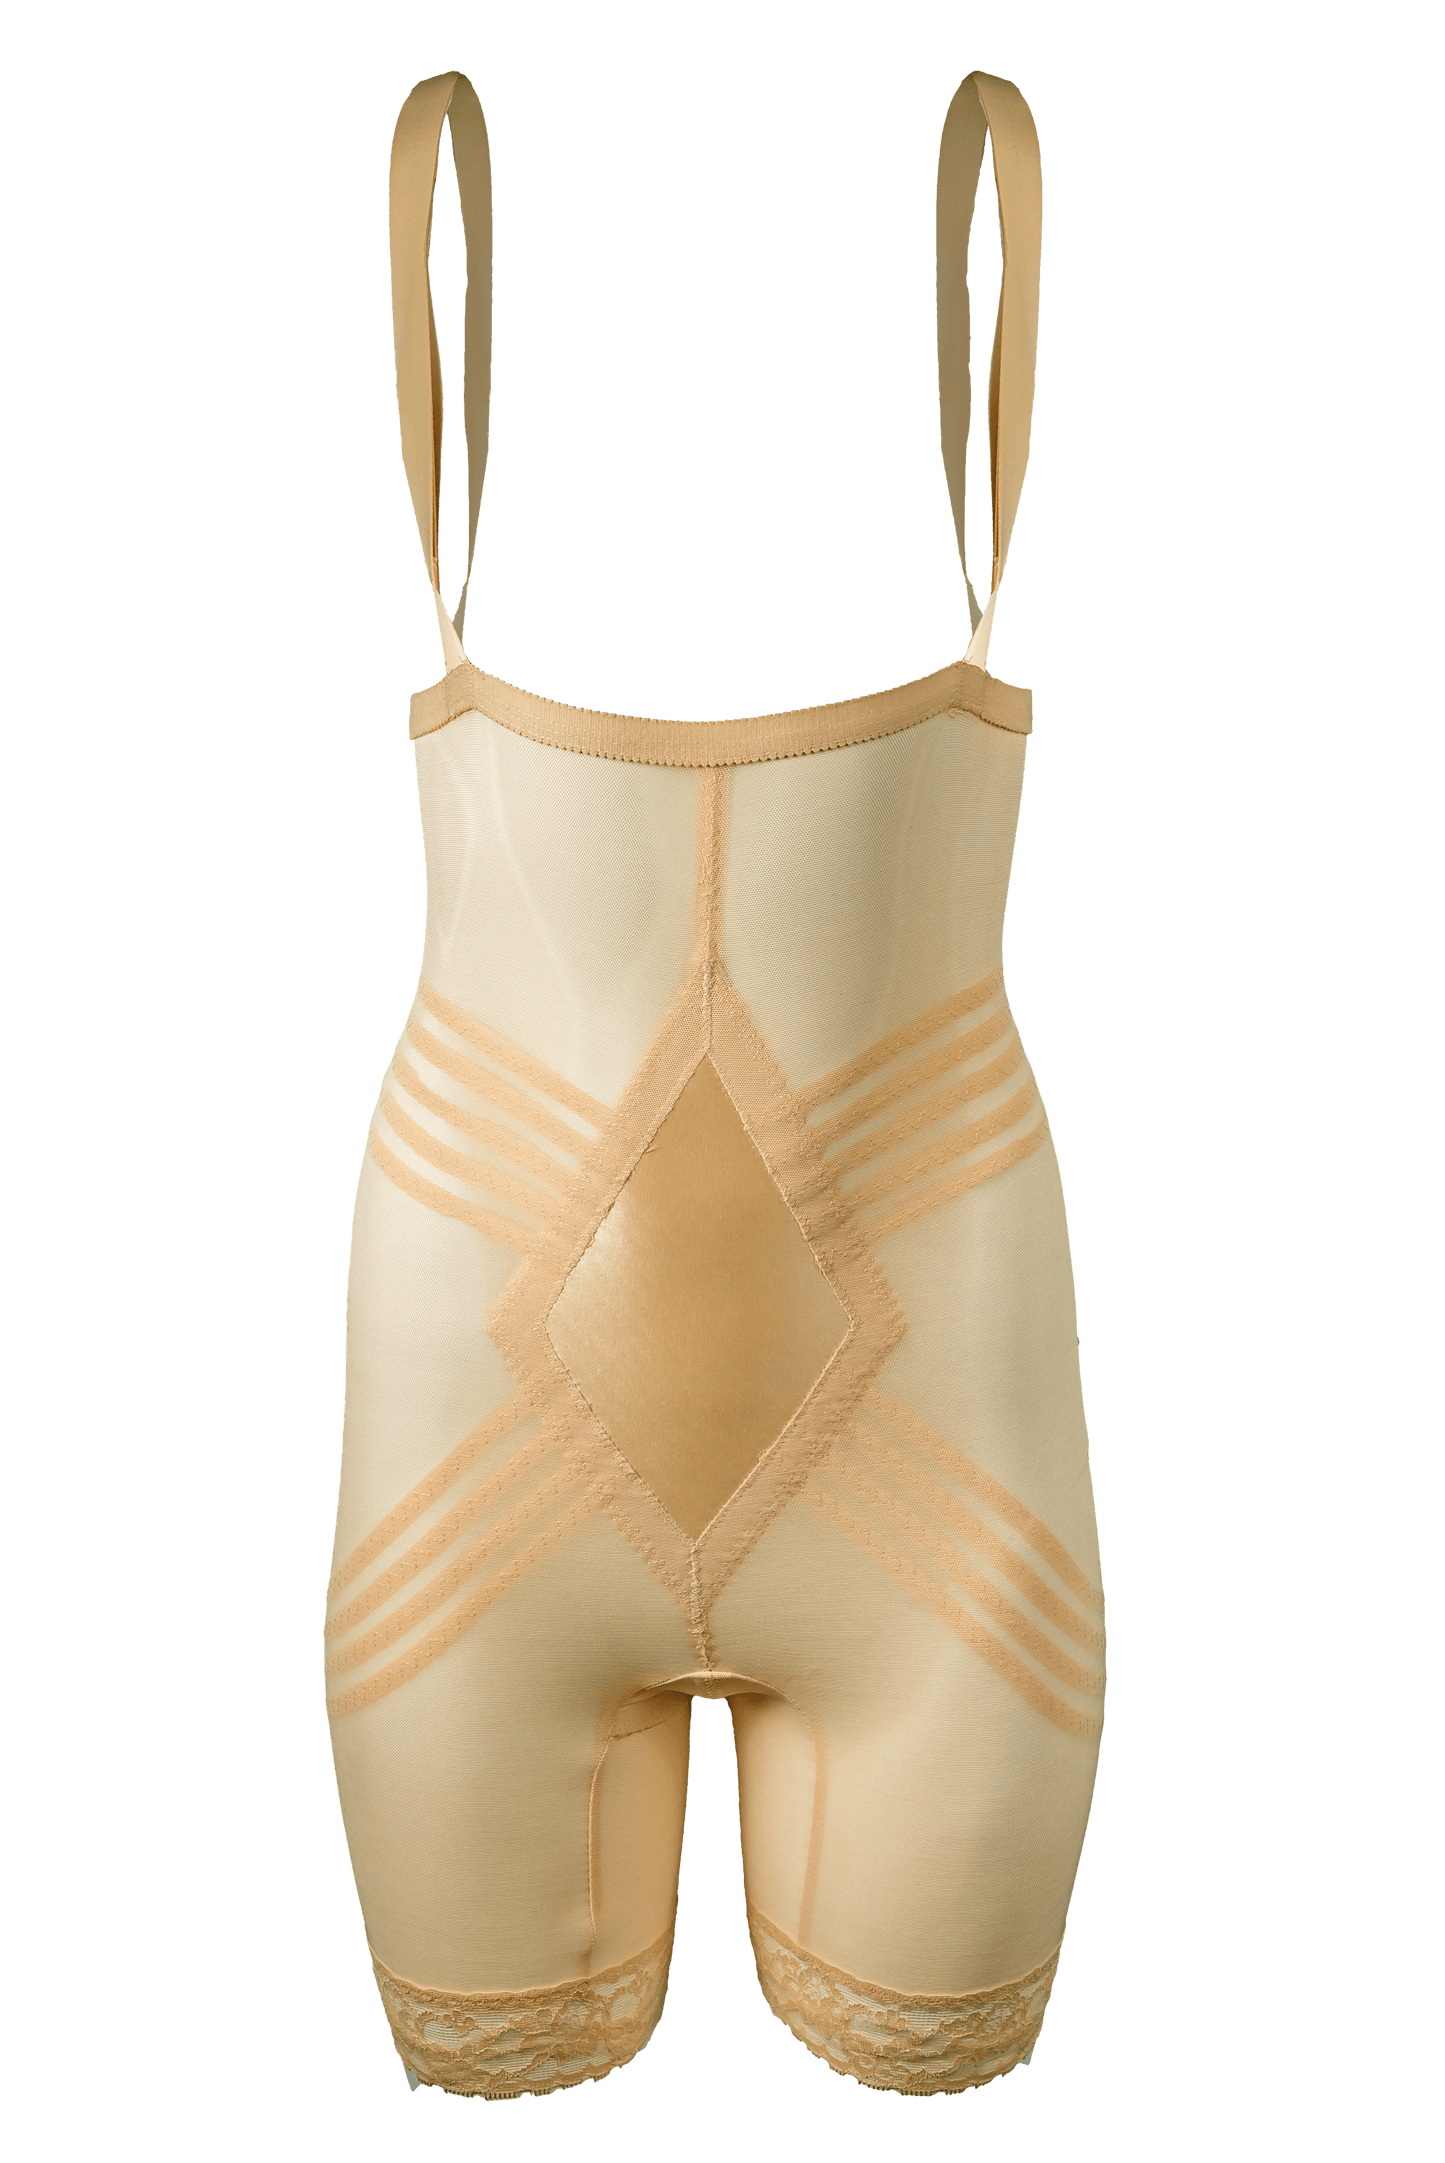 Rago Shapewear - Show off your Rago expertise and comment this